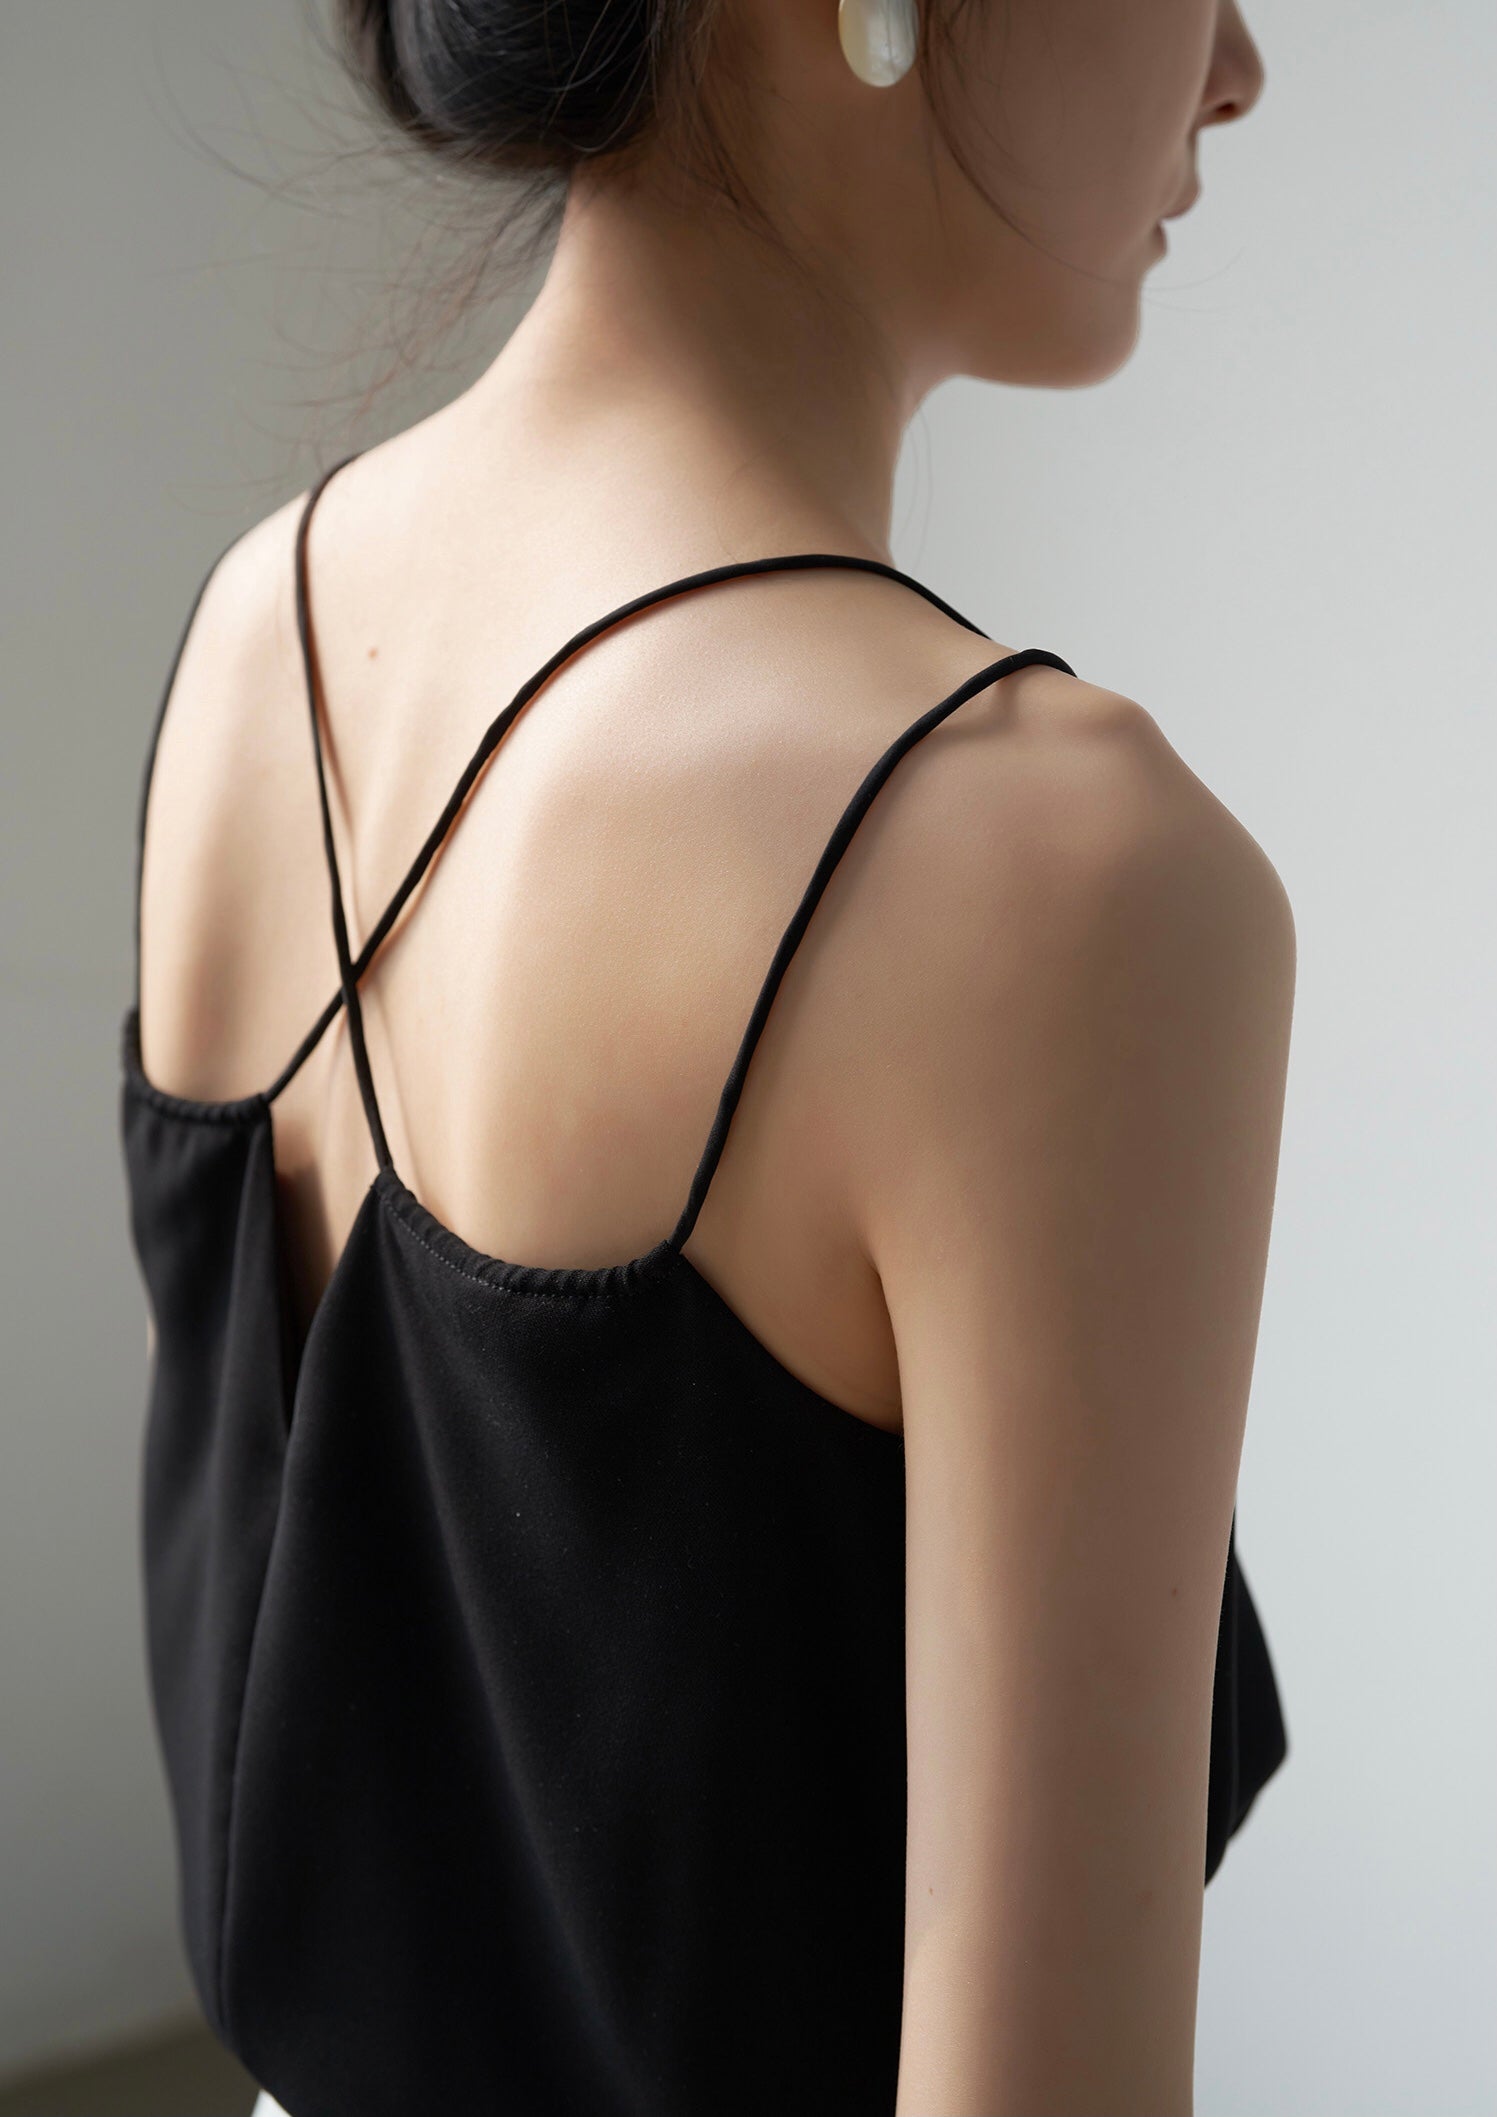 Double Strap Cross Back Camisole in Black